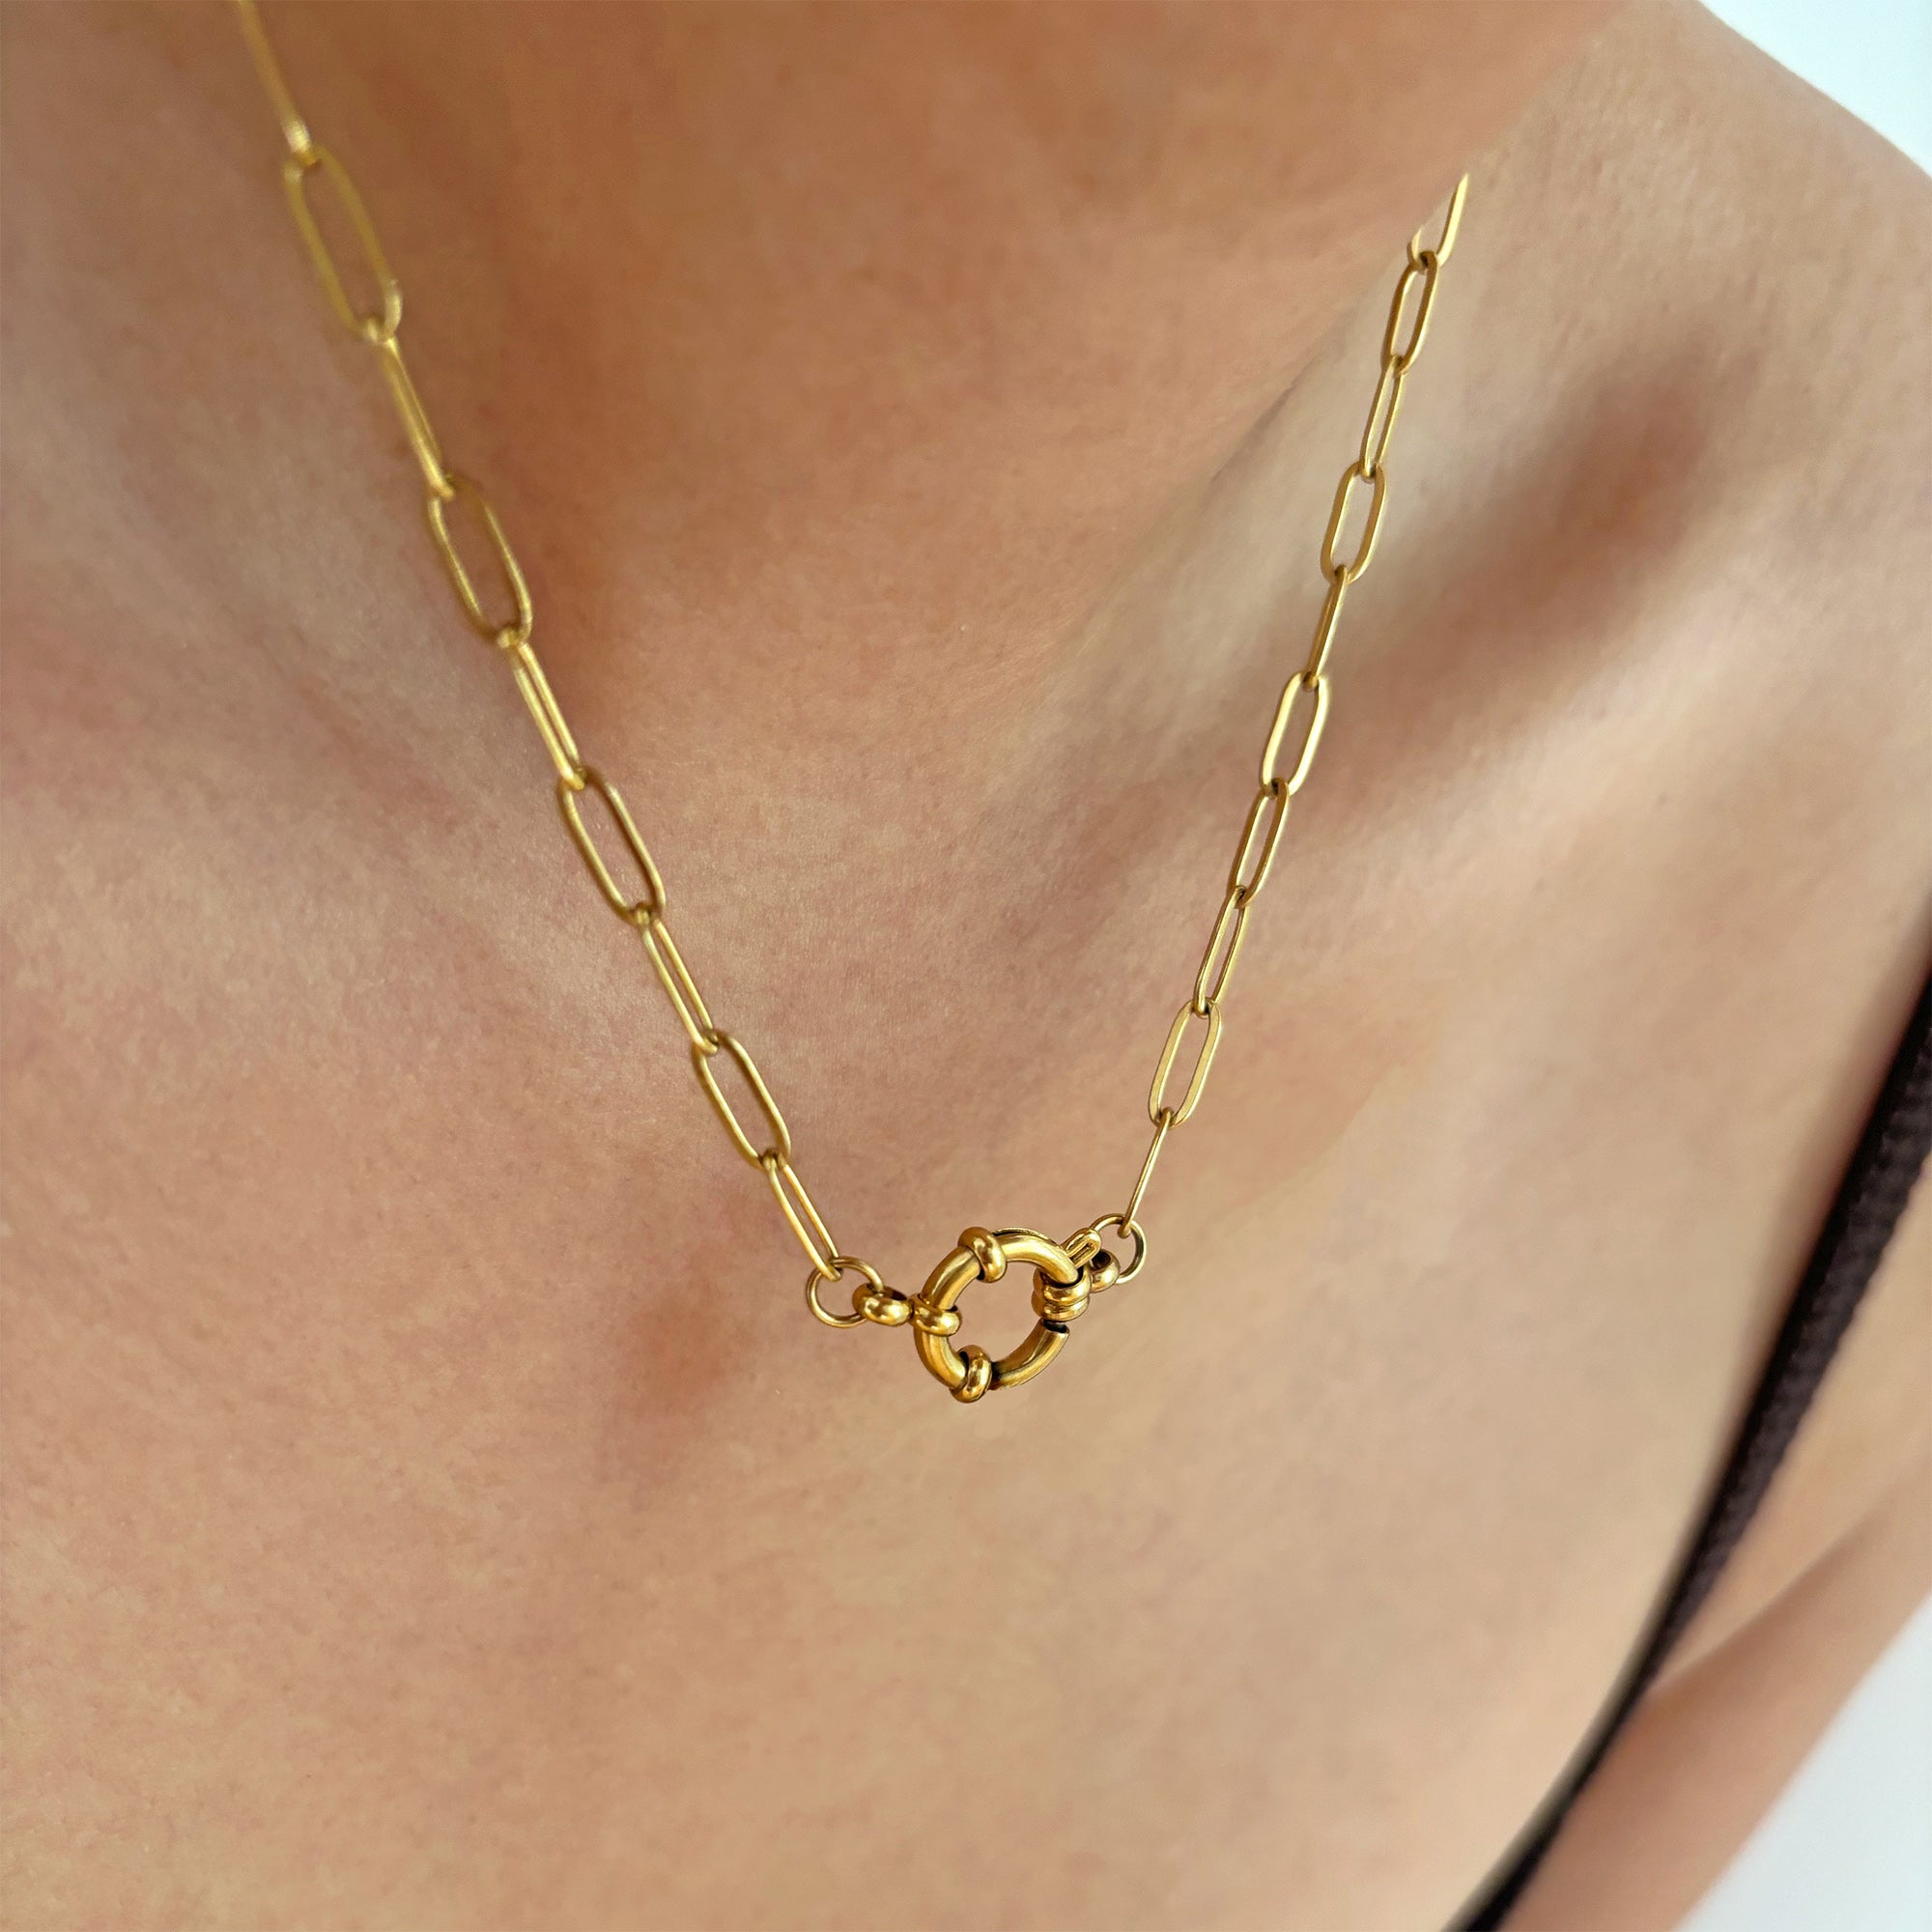 gold paperclip chain charm necklace waterproof jewelry